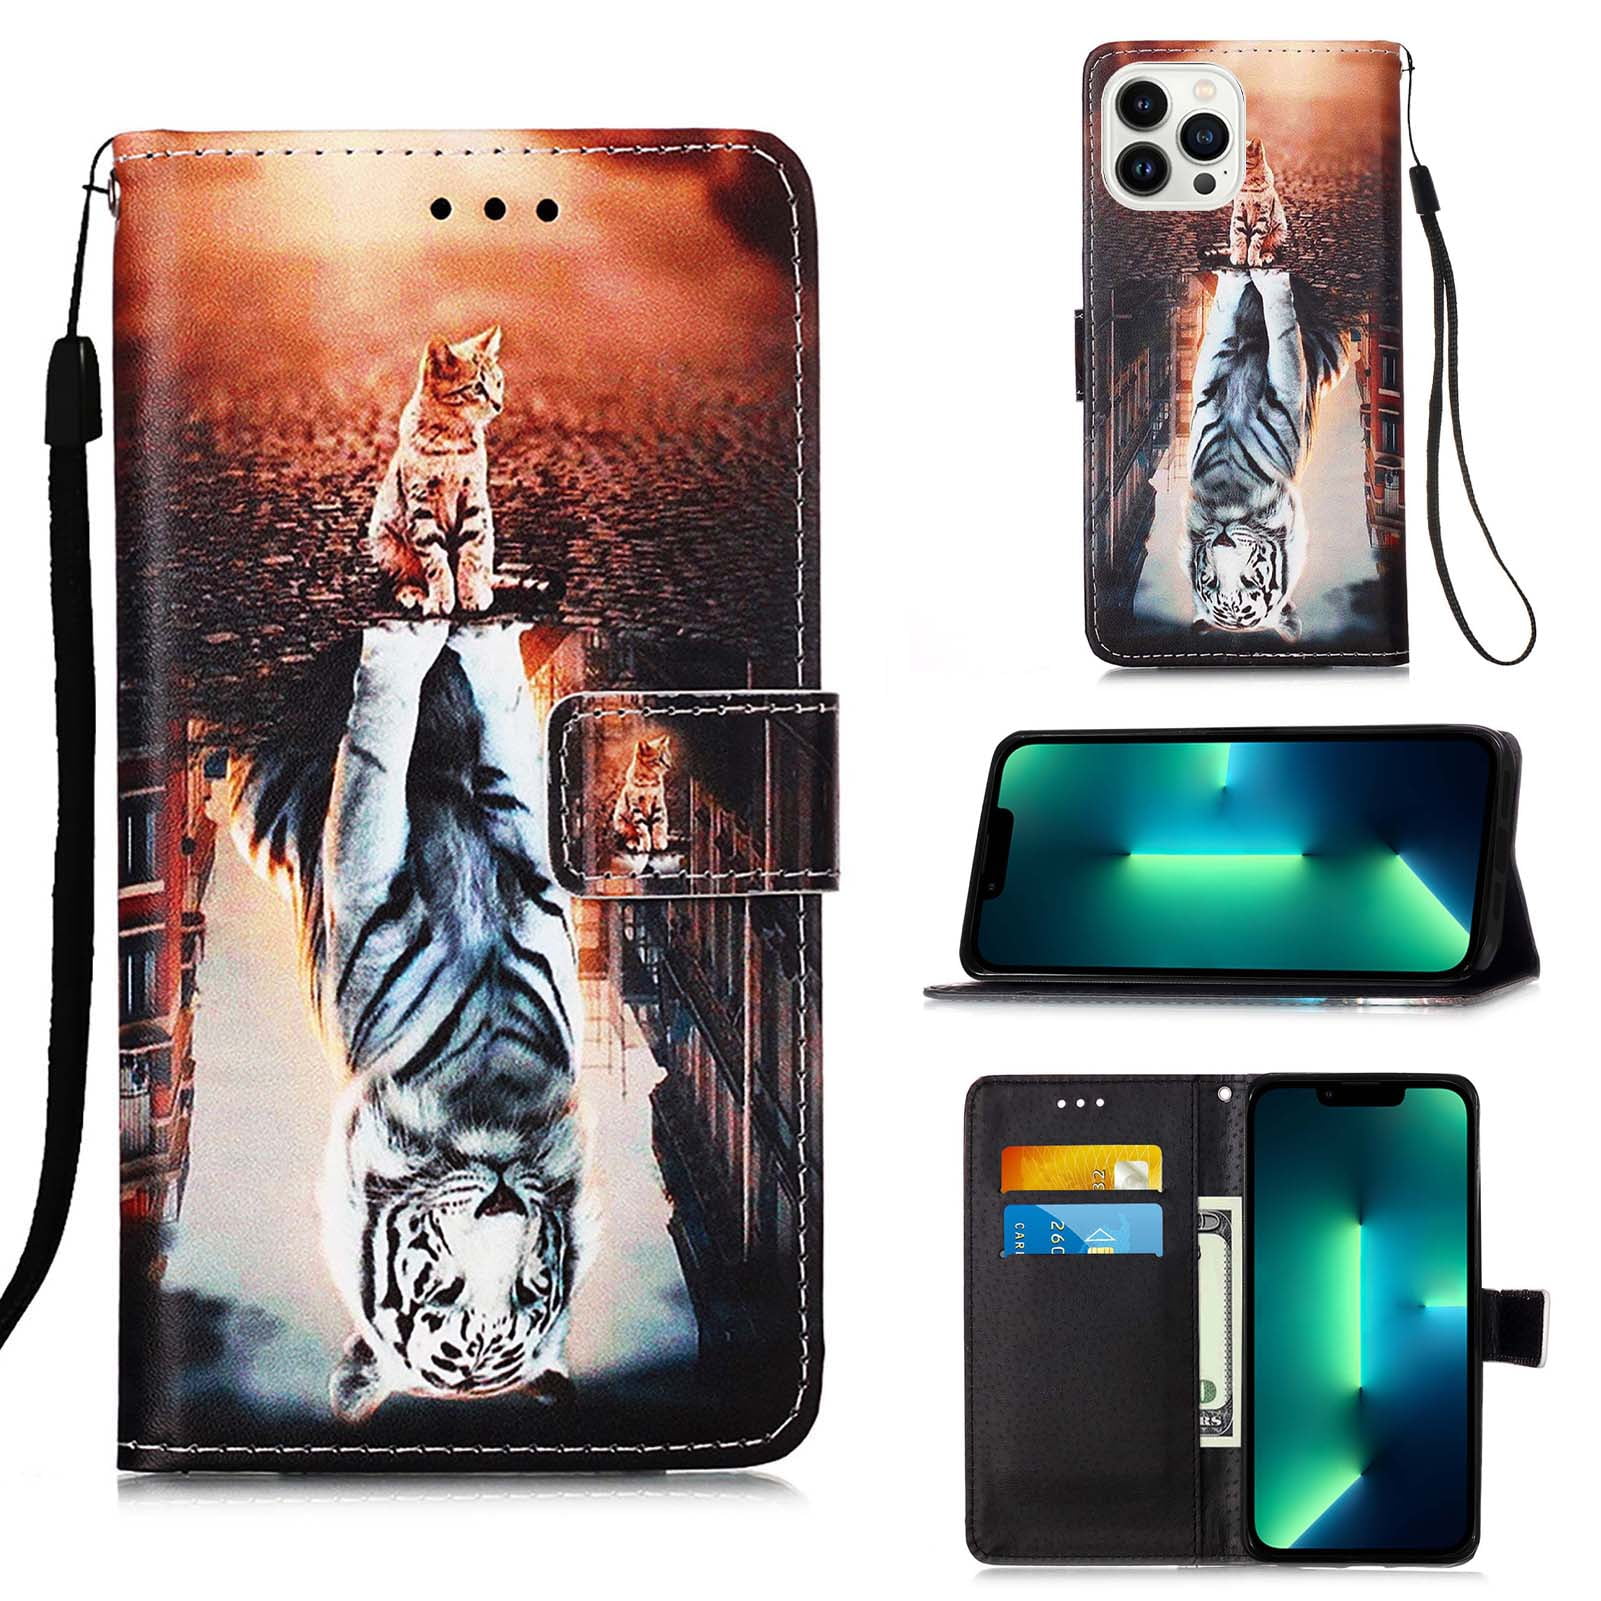 Shockproof Premium PU Leather Bumper Flip Wallet Notebook Phone Case Cover with Kickstand Magnetic Card Holder Slot Protective Skin for Huawei Mate 20 Lite Cat mother & baby Huawei Mate 20 Lite Case 